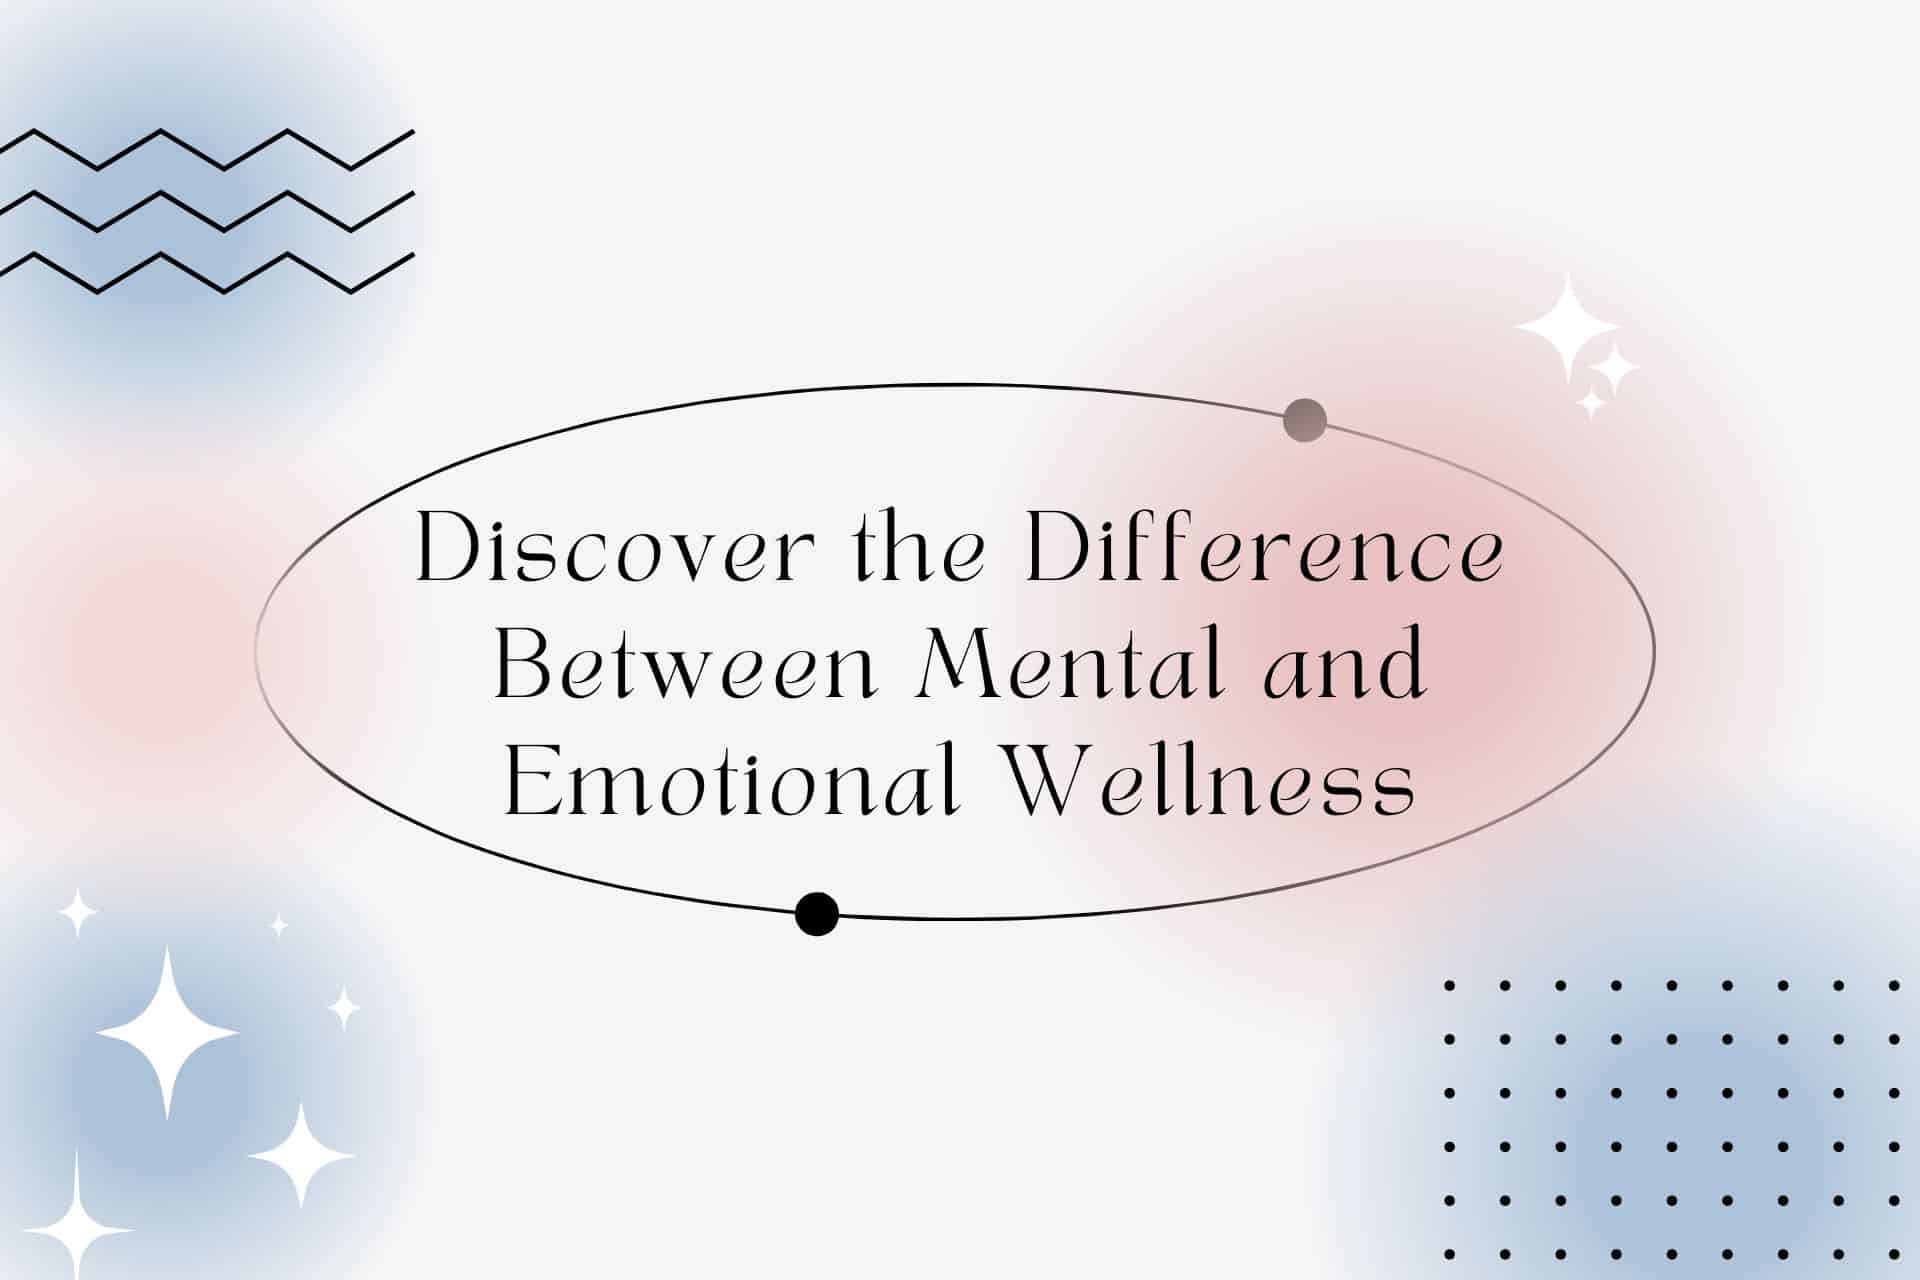 Difference between Mental and Emotional Wellness